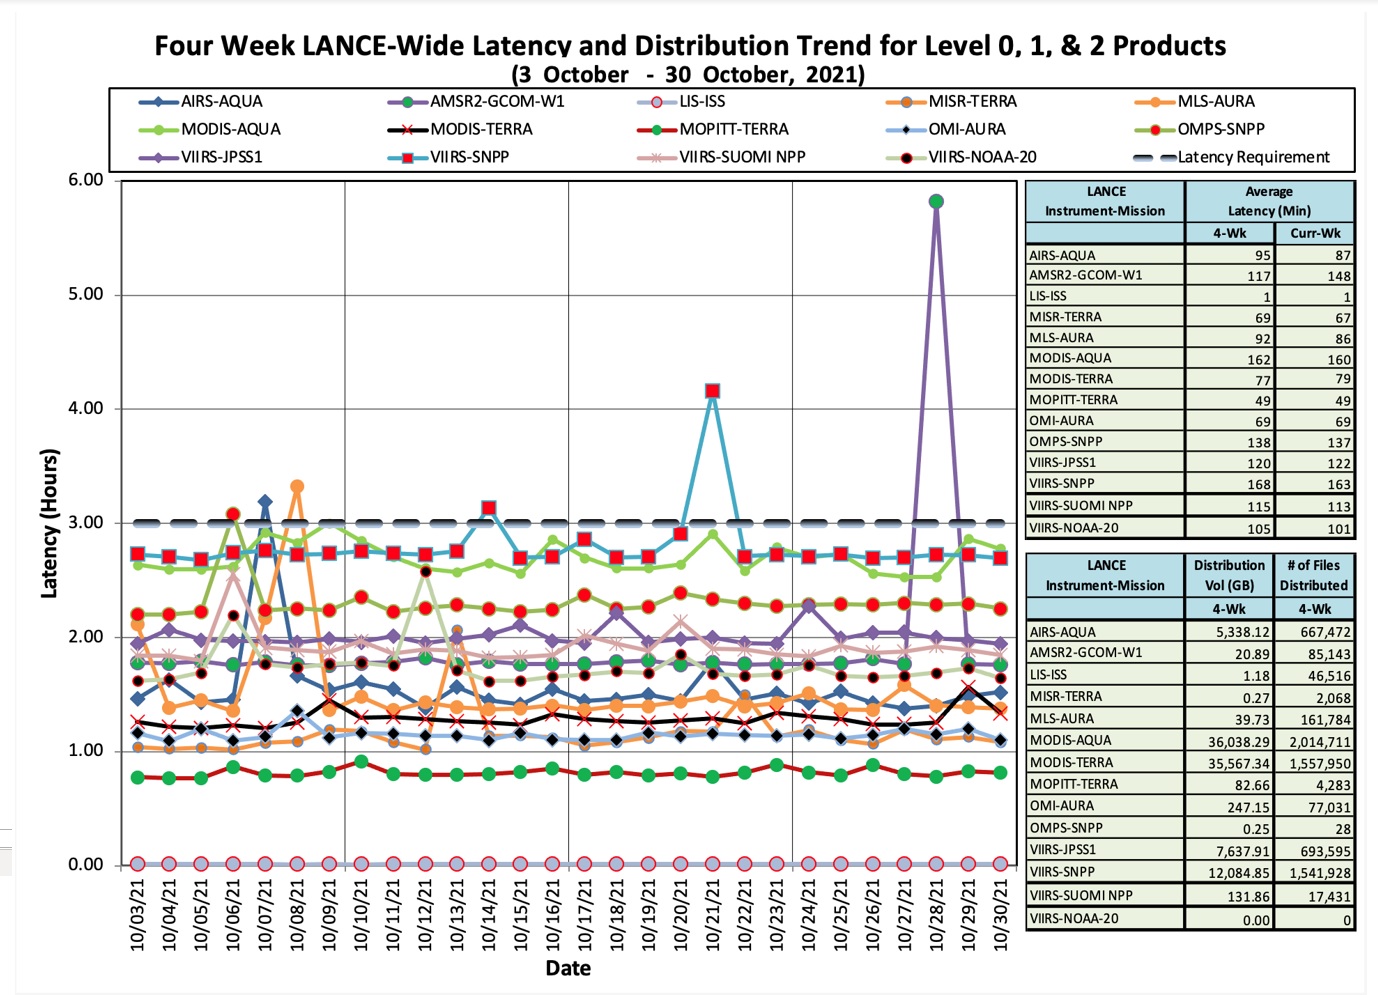 Four-week LANCE-wide latency and distribution trend for Level 0, 1, 2 products